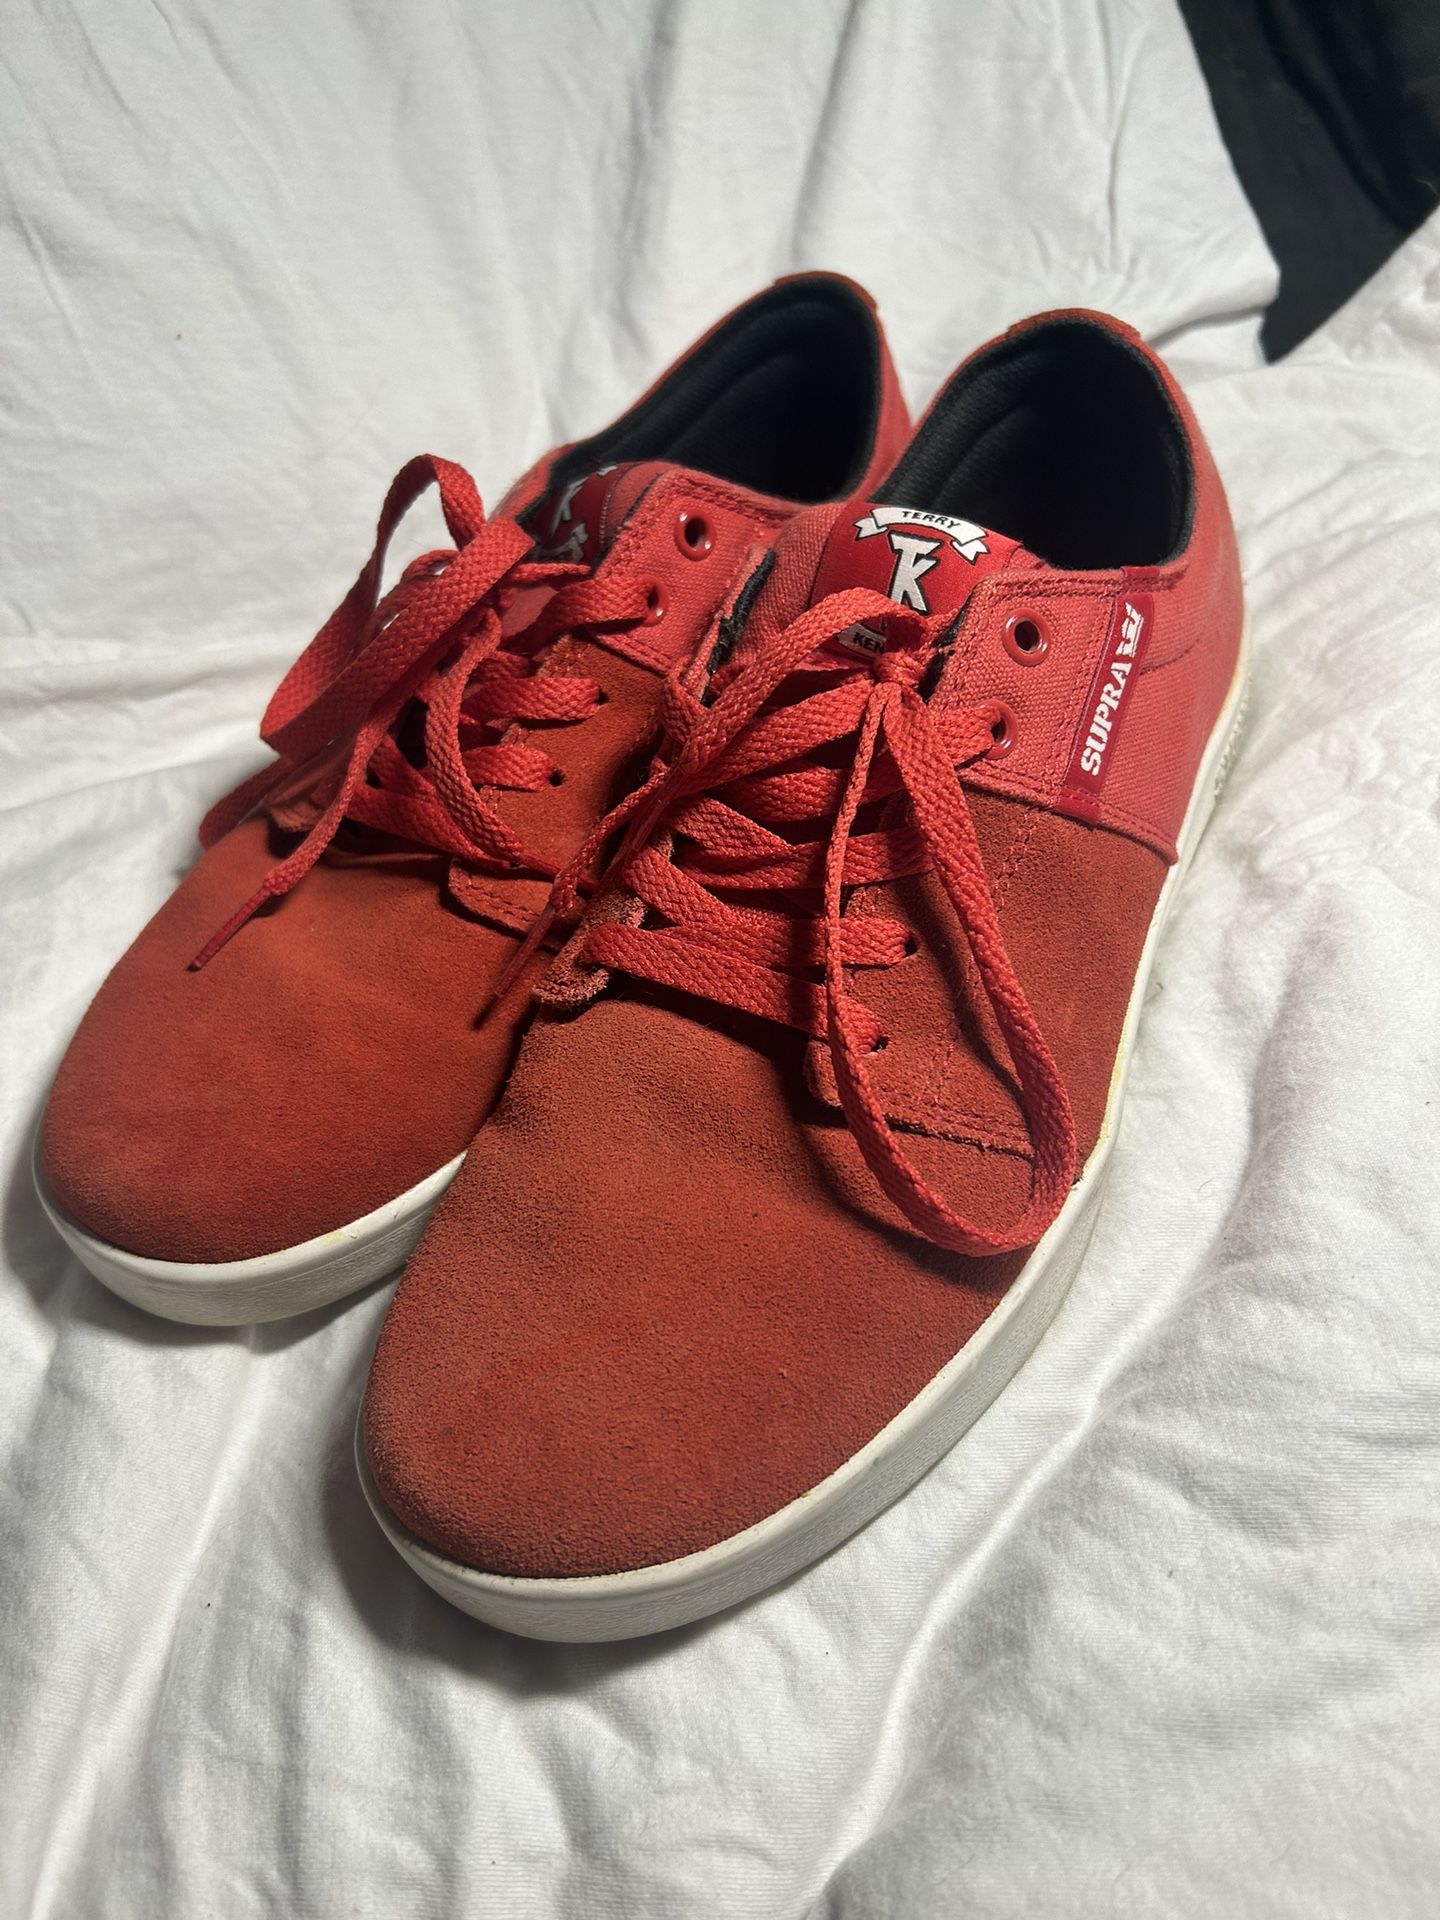 Supra Terry Kennedy Skate Shoes